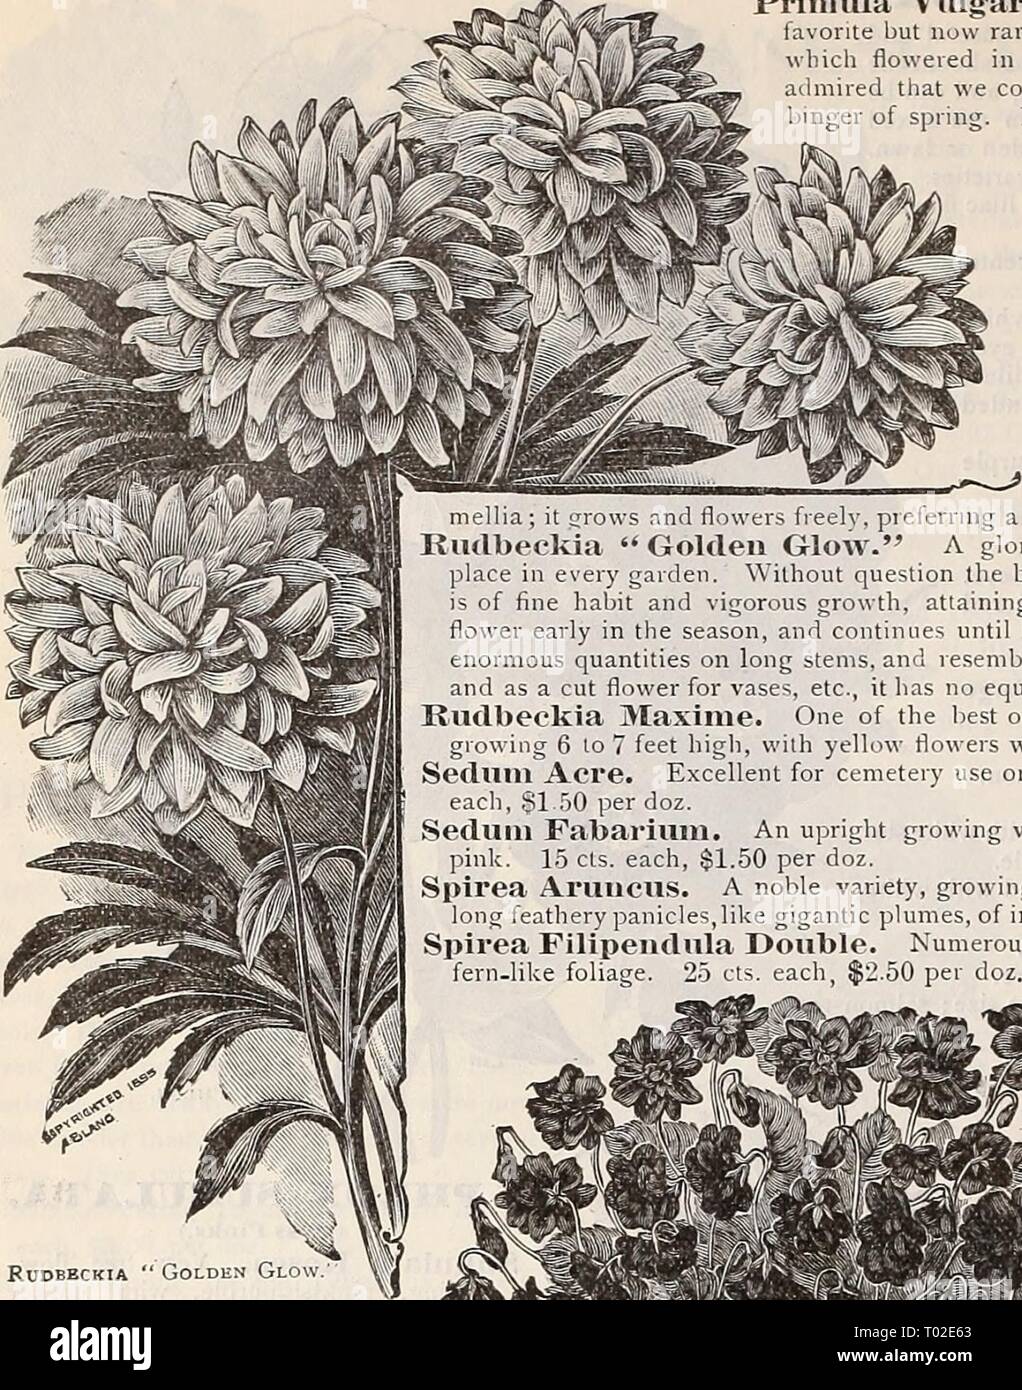 Dreer's garden calendar : 1898 . dreersgardencale1898henr Year: 1898  148 SELECT HARDY PERENNIALS. Primula Vlllg'aris (^The English Primrose). This is an old favorite but now rarely seen in the modern garden. A few plants which flowered in our trial grounds last spring were so much admned that we concluded to prepare a large stock of this har- limgei of spimg. 15 cts. each, §1.25 per doz. Prinmla Cortusoitles Sieboldii. A pretty Japanese species with large rose or lavender-colored flowers, produced in dense heads 10 in. high. 15c. each, $1.50 per doz. Prinmla Rosea. A pretty, compact- growing, Stock Photo